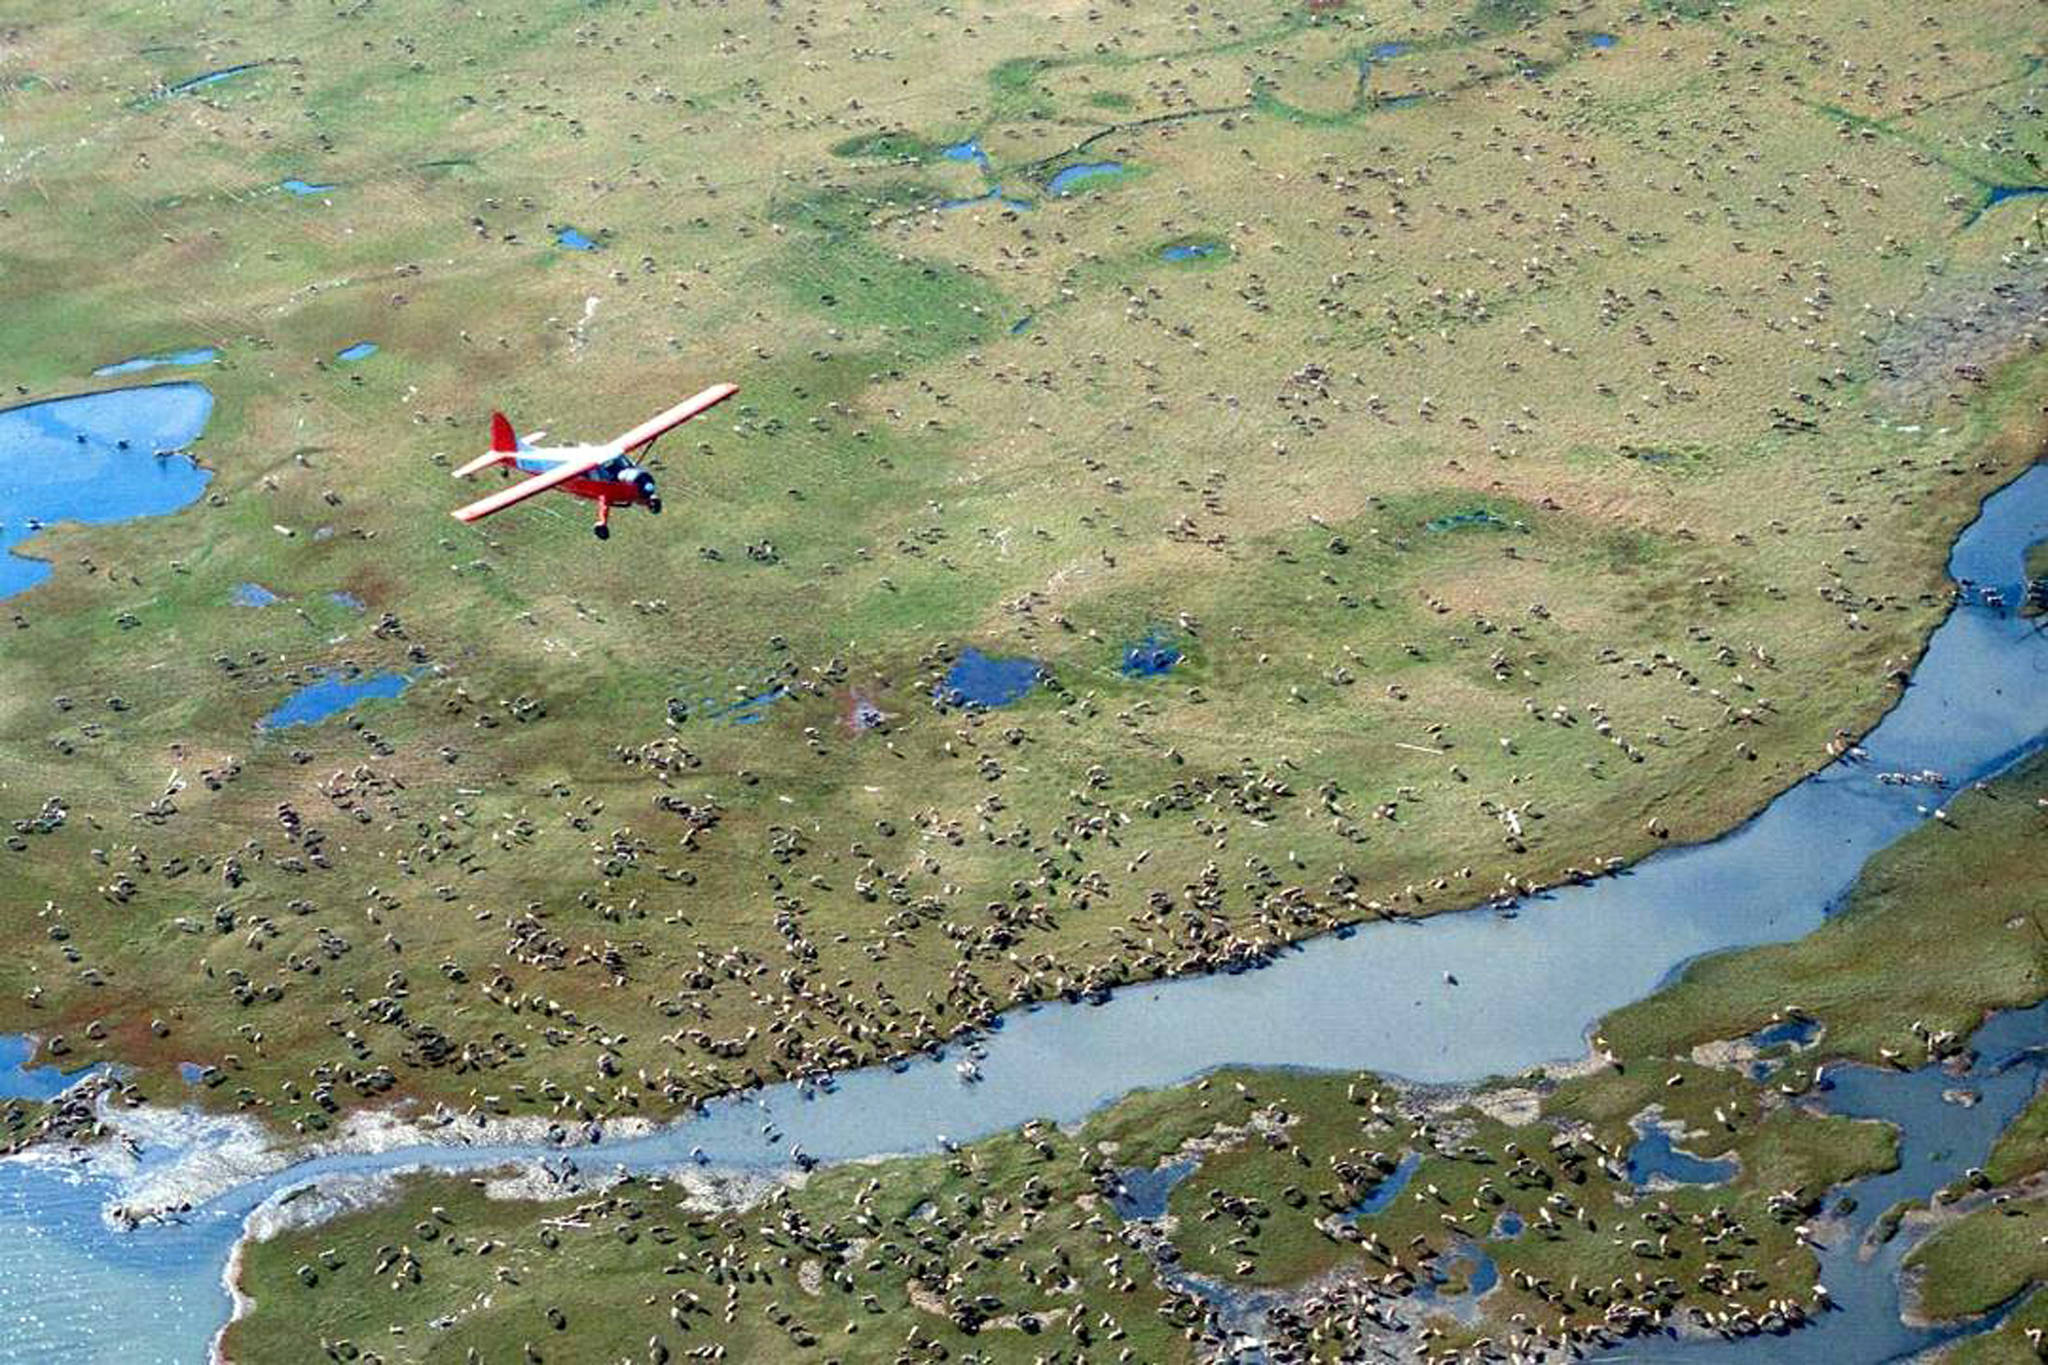 U.S. Fish and Wildlife Service                                 An airplane flies over caribou from the Porcupine Caribou Herd on the coastal plain of the Arctic National Wildlife Refuge in northeast Alaska.The Department of the Interior has approved an oil and gas leasing program within Alaska’s Arctic National Wildlife Refuge. The refuge is home to polar bears, caribou and other wildlife. Secretary of the Interior David Bernhardt signed the Record of Decision, which will determine where oil and gas leasing will take place in the refuge’s coastal plain.